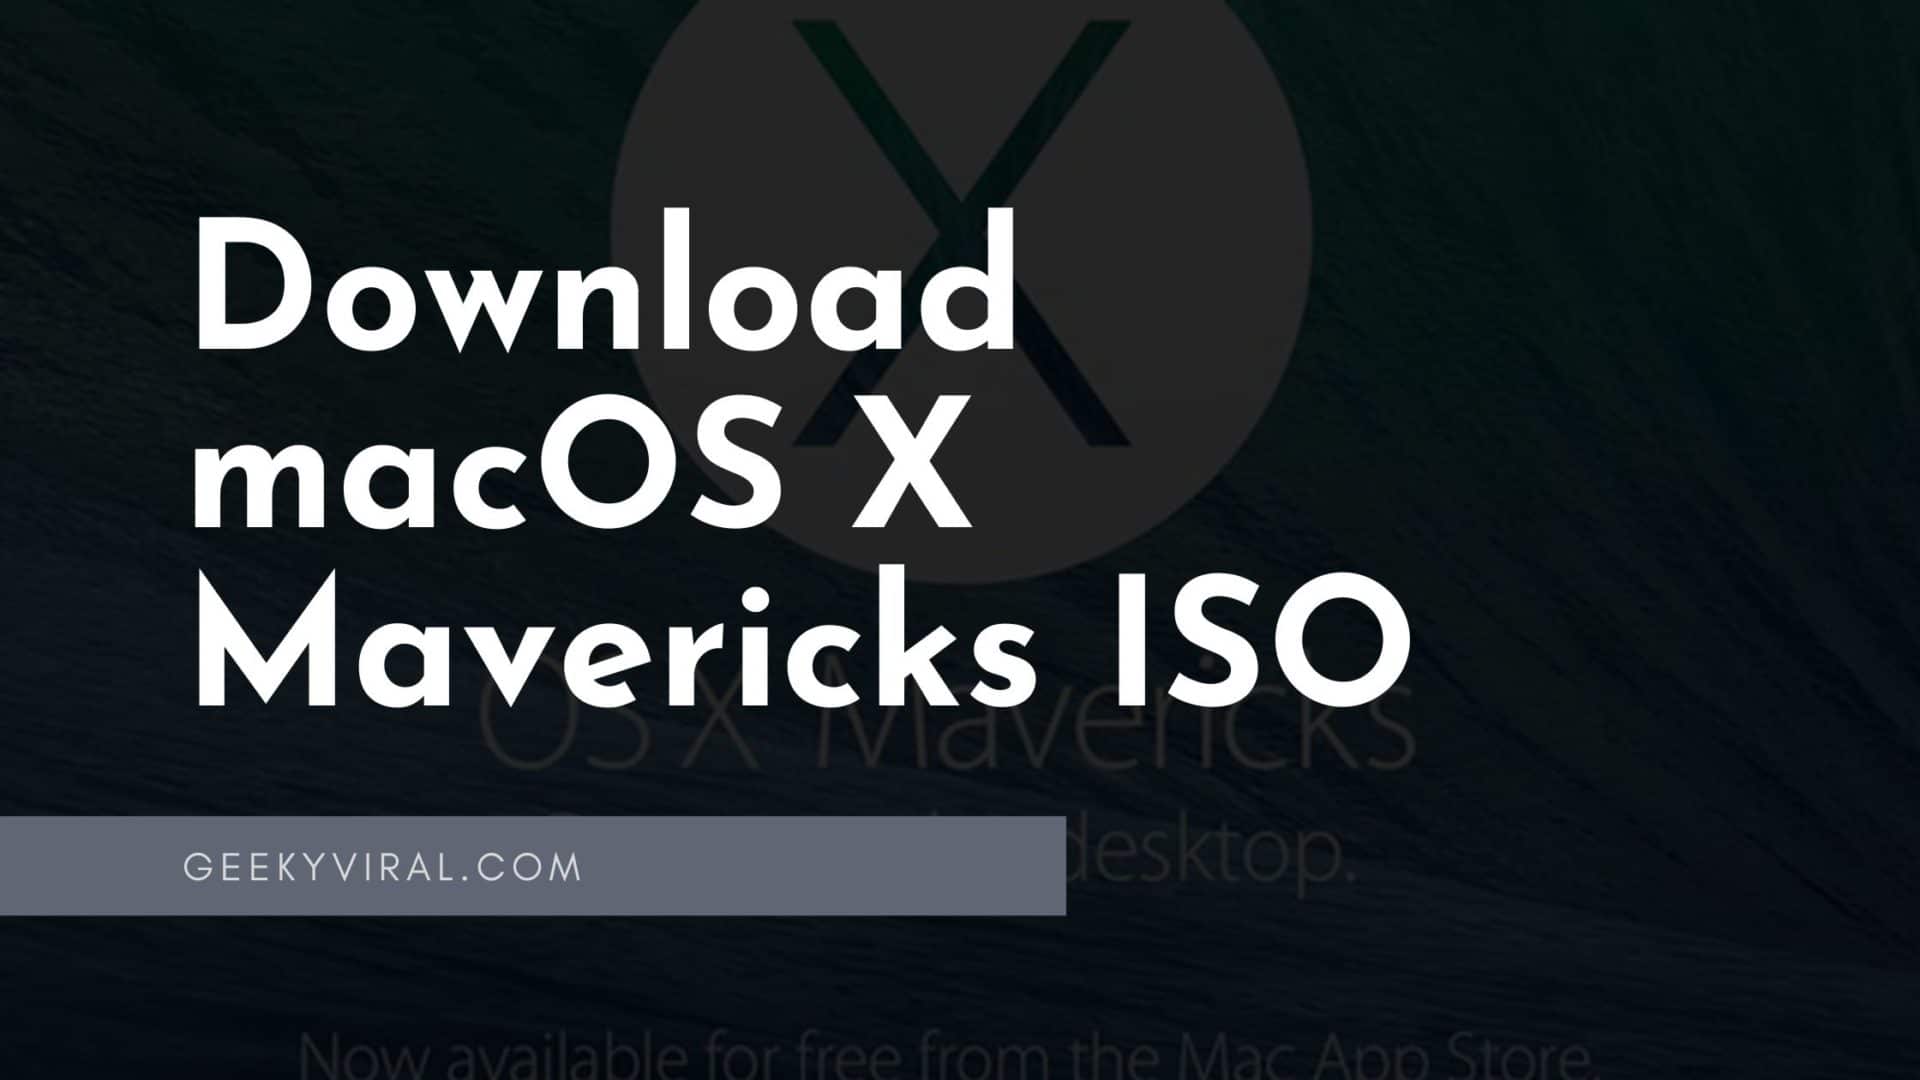 download mac os x mavericks 10.9 iso directly for free